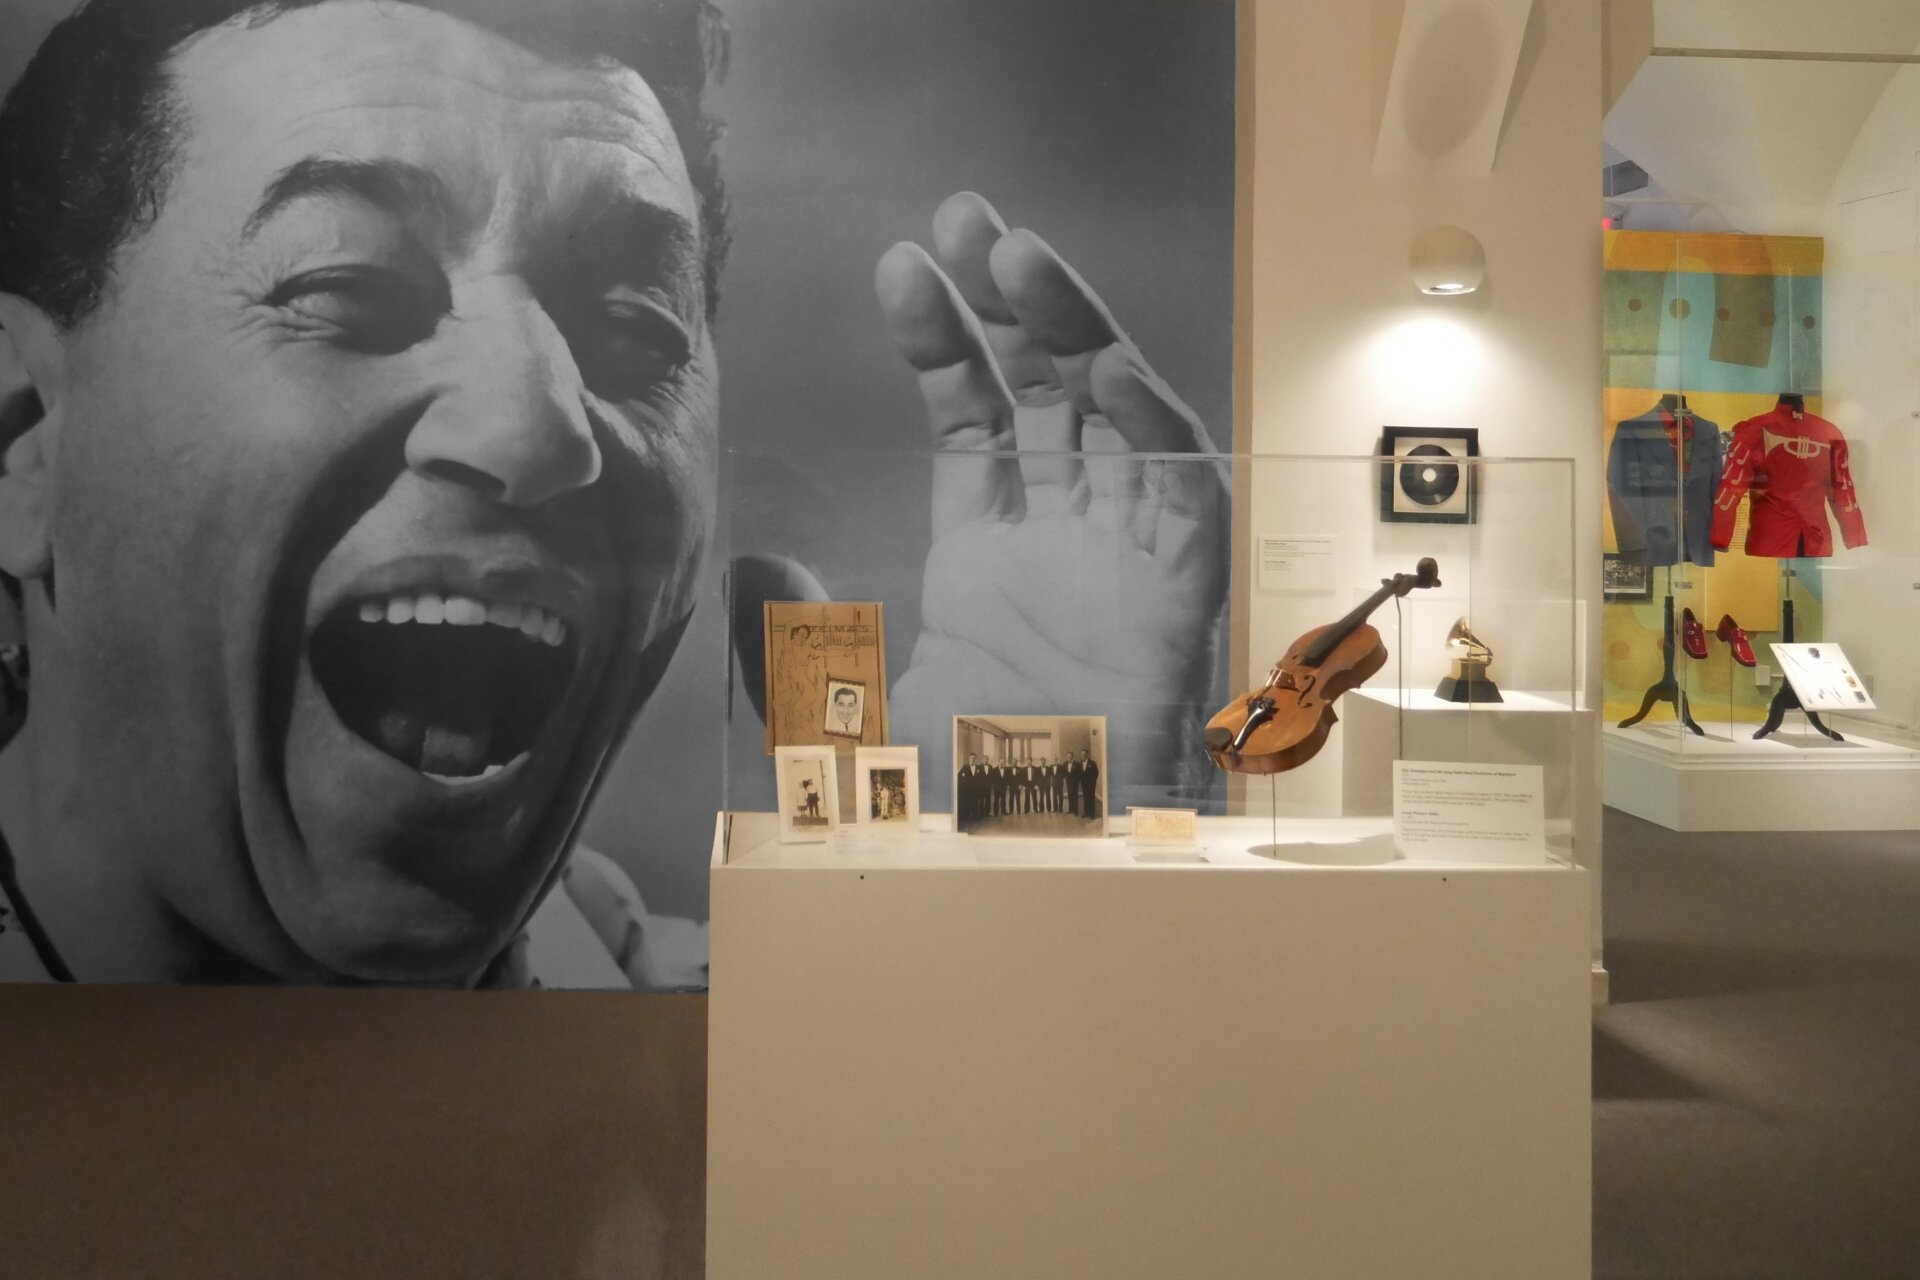 The Louis Prima collection is open for research at Tulane